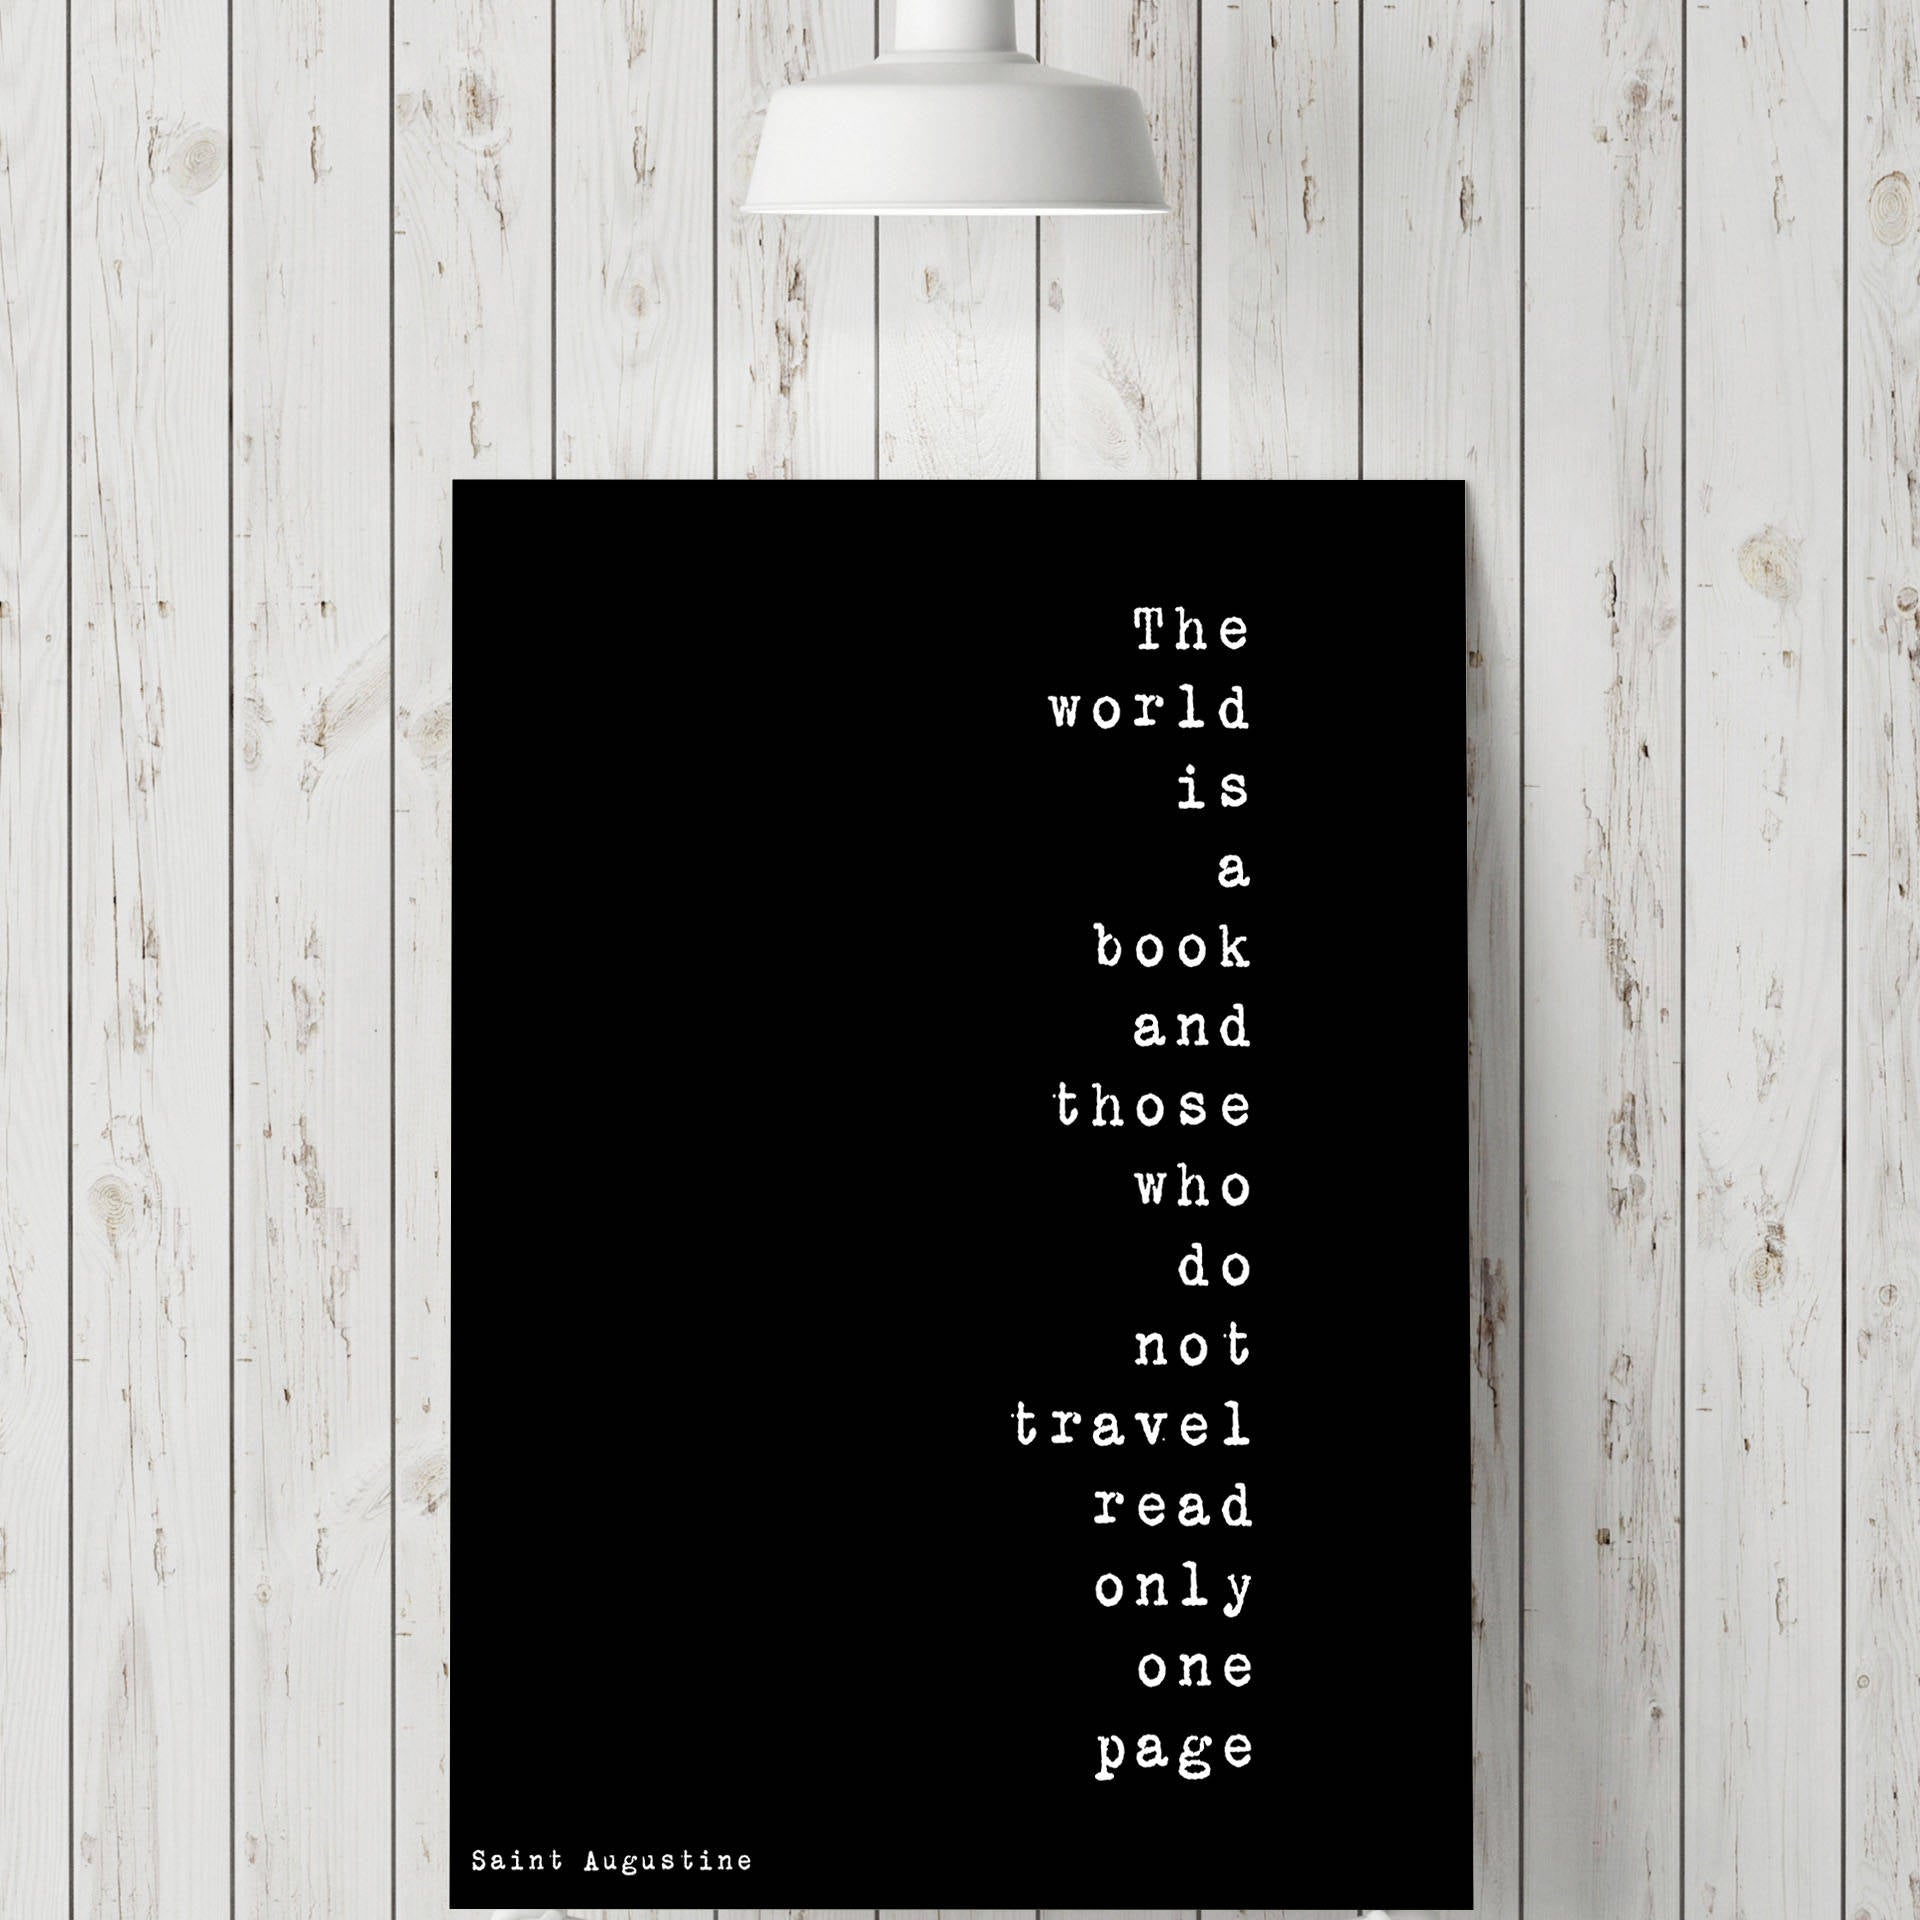 The World Is A Book Inspirational Quote, Travel Decor Quote Art Print in Black & White, Travel Art Unframed Home Decor, St Augustine - BookQuoteDecor